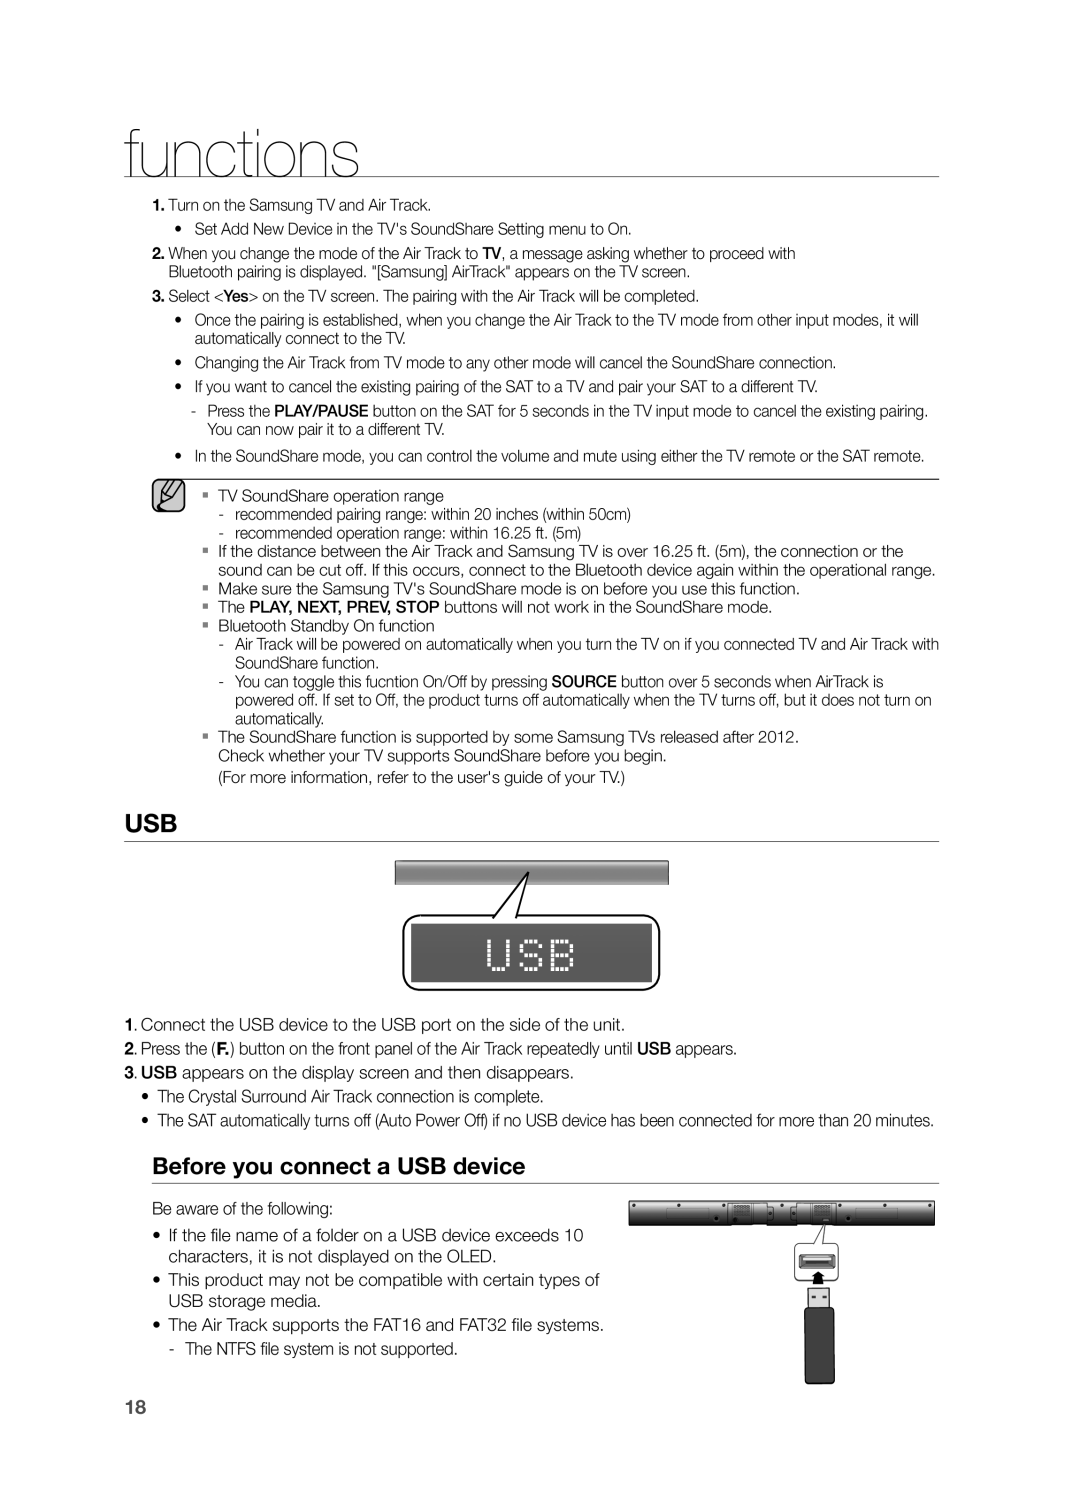 Samsung HW-FM55C user manual functions, Before you connect a USB device 